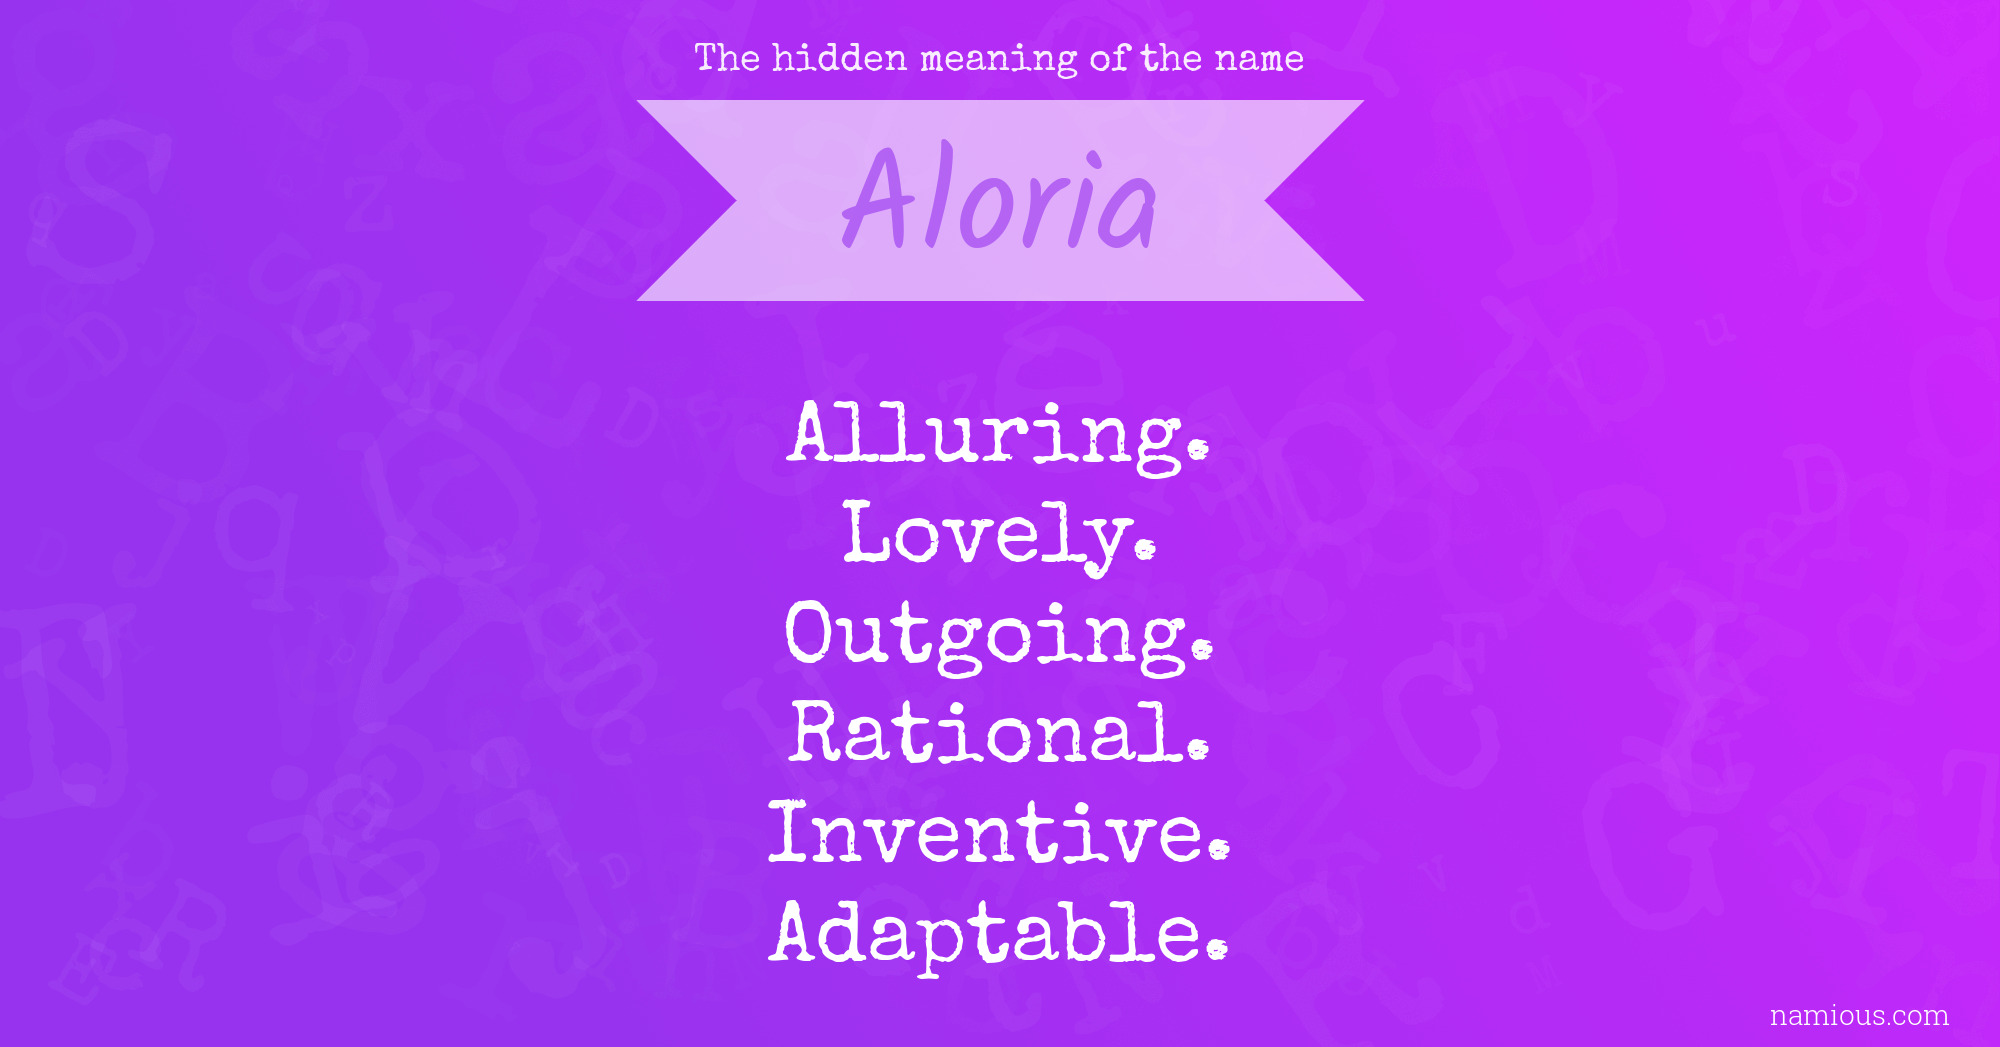 The hidden meaning of the name Aloria